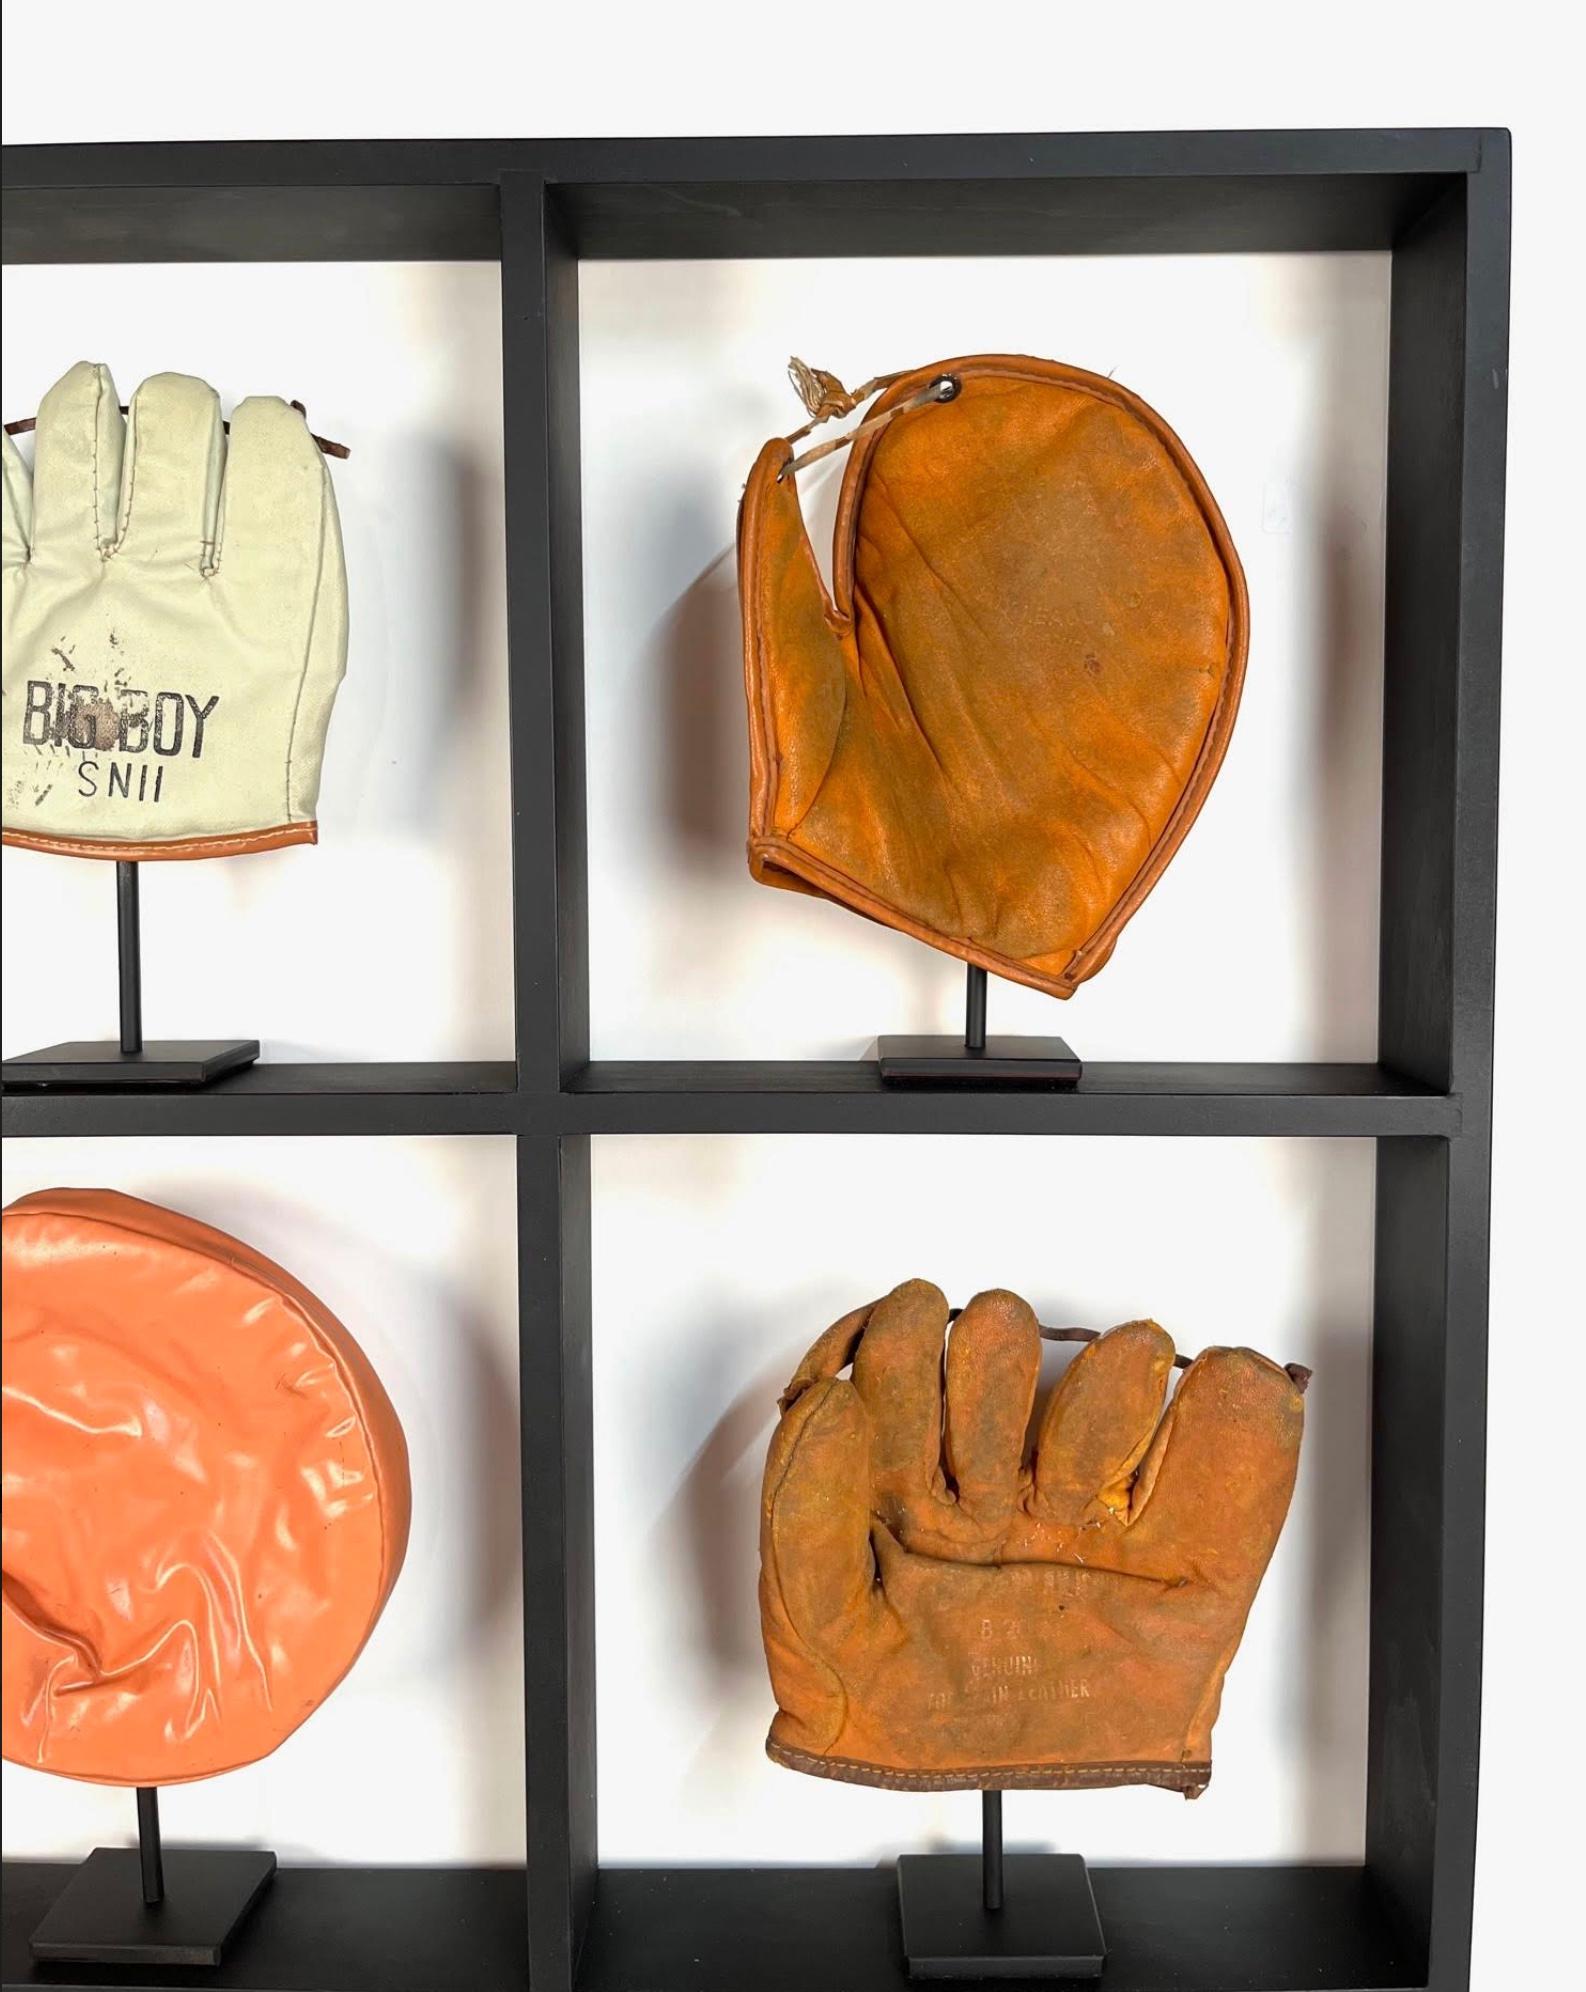 A collection of 9 rare antique small children's baseball gloves each measuring approximately 6.5